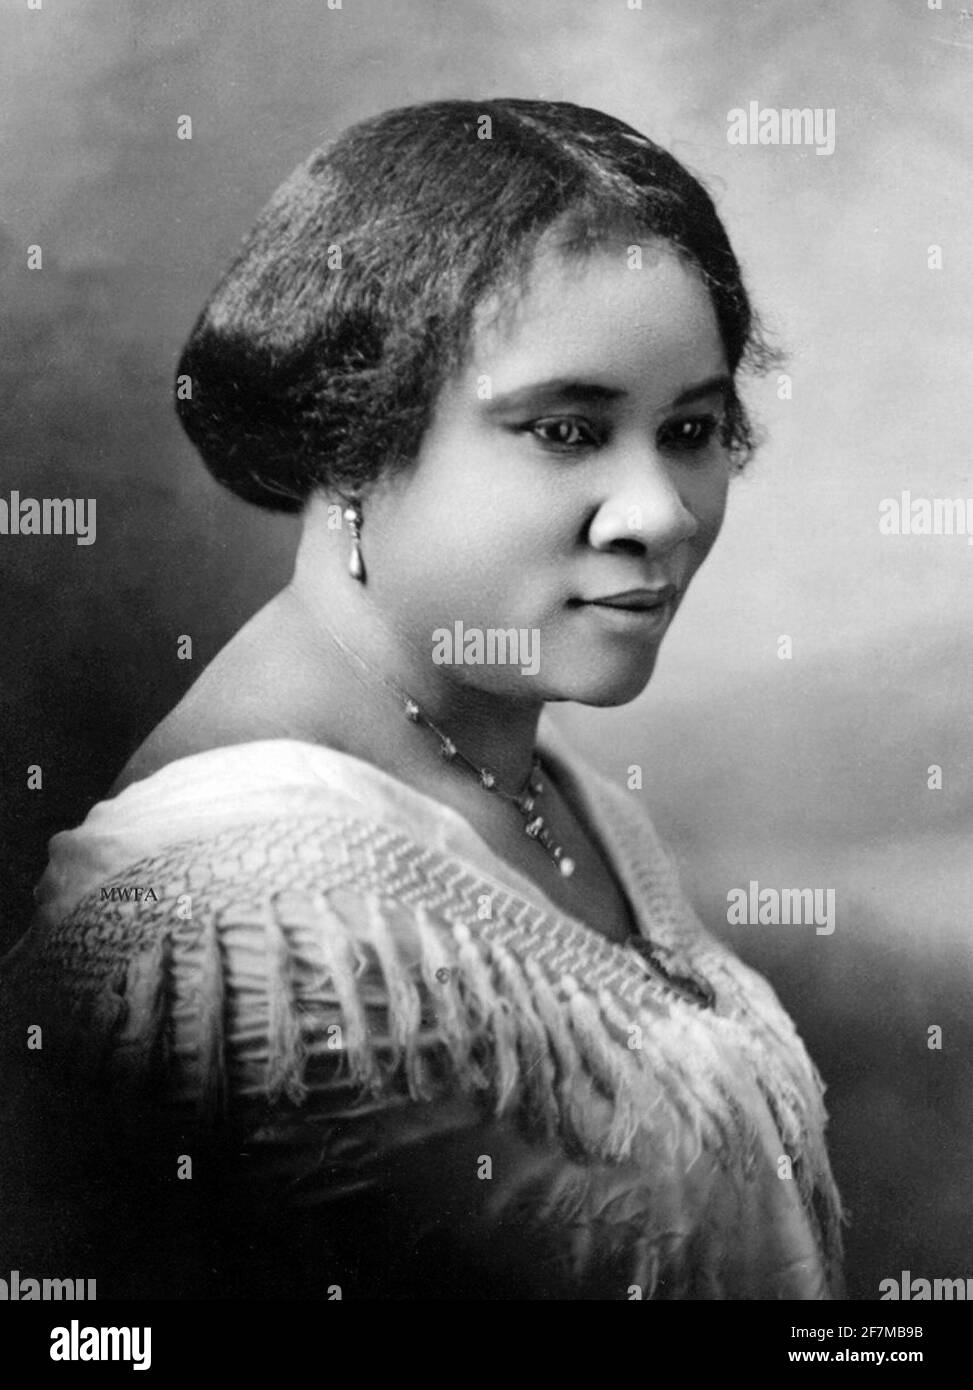 Madam C.J. Walker. Portrait of the American entrepreneur and philanthropist, Madam C J Walker  (b.  Sarah Breedlove, 1867-1919), c. 1914. She is recorded as the first female self-made millionaire in America. Stock Photo